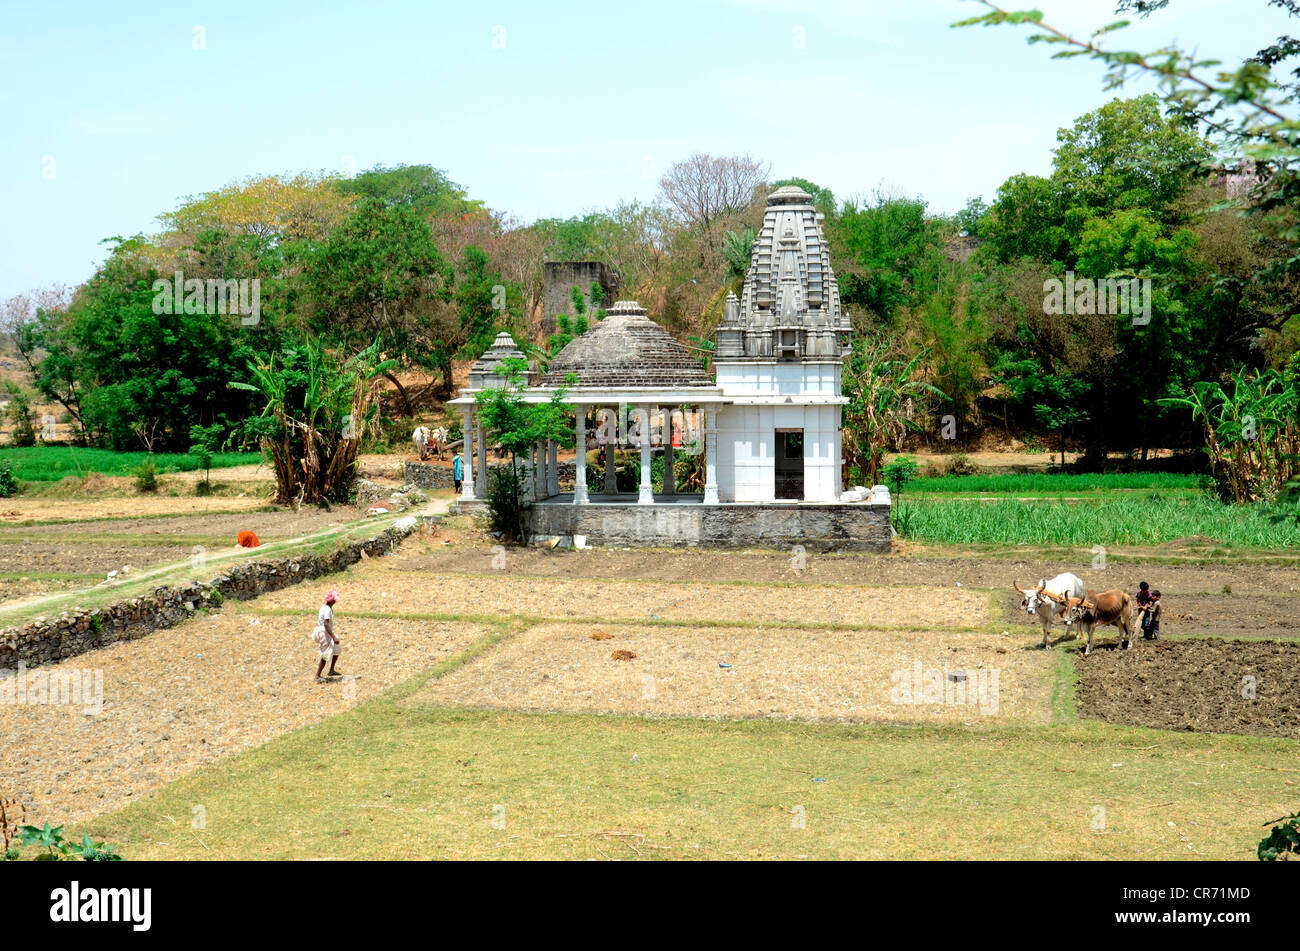 A view of a temple in field in rural india Stock Photo